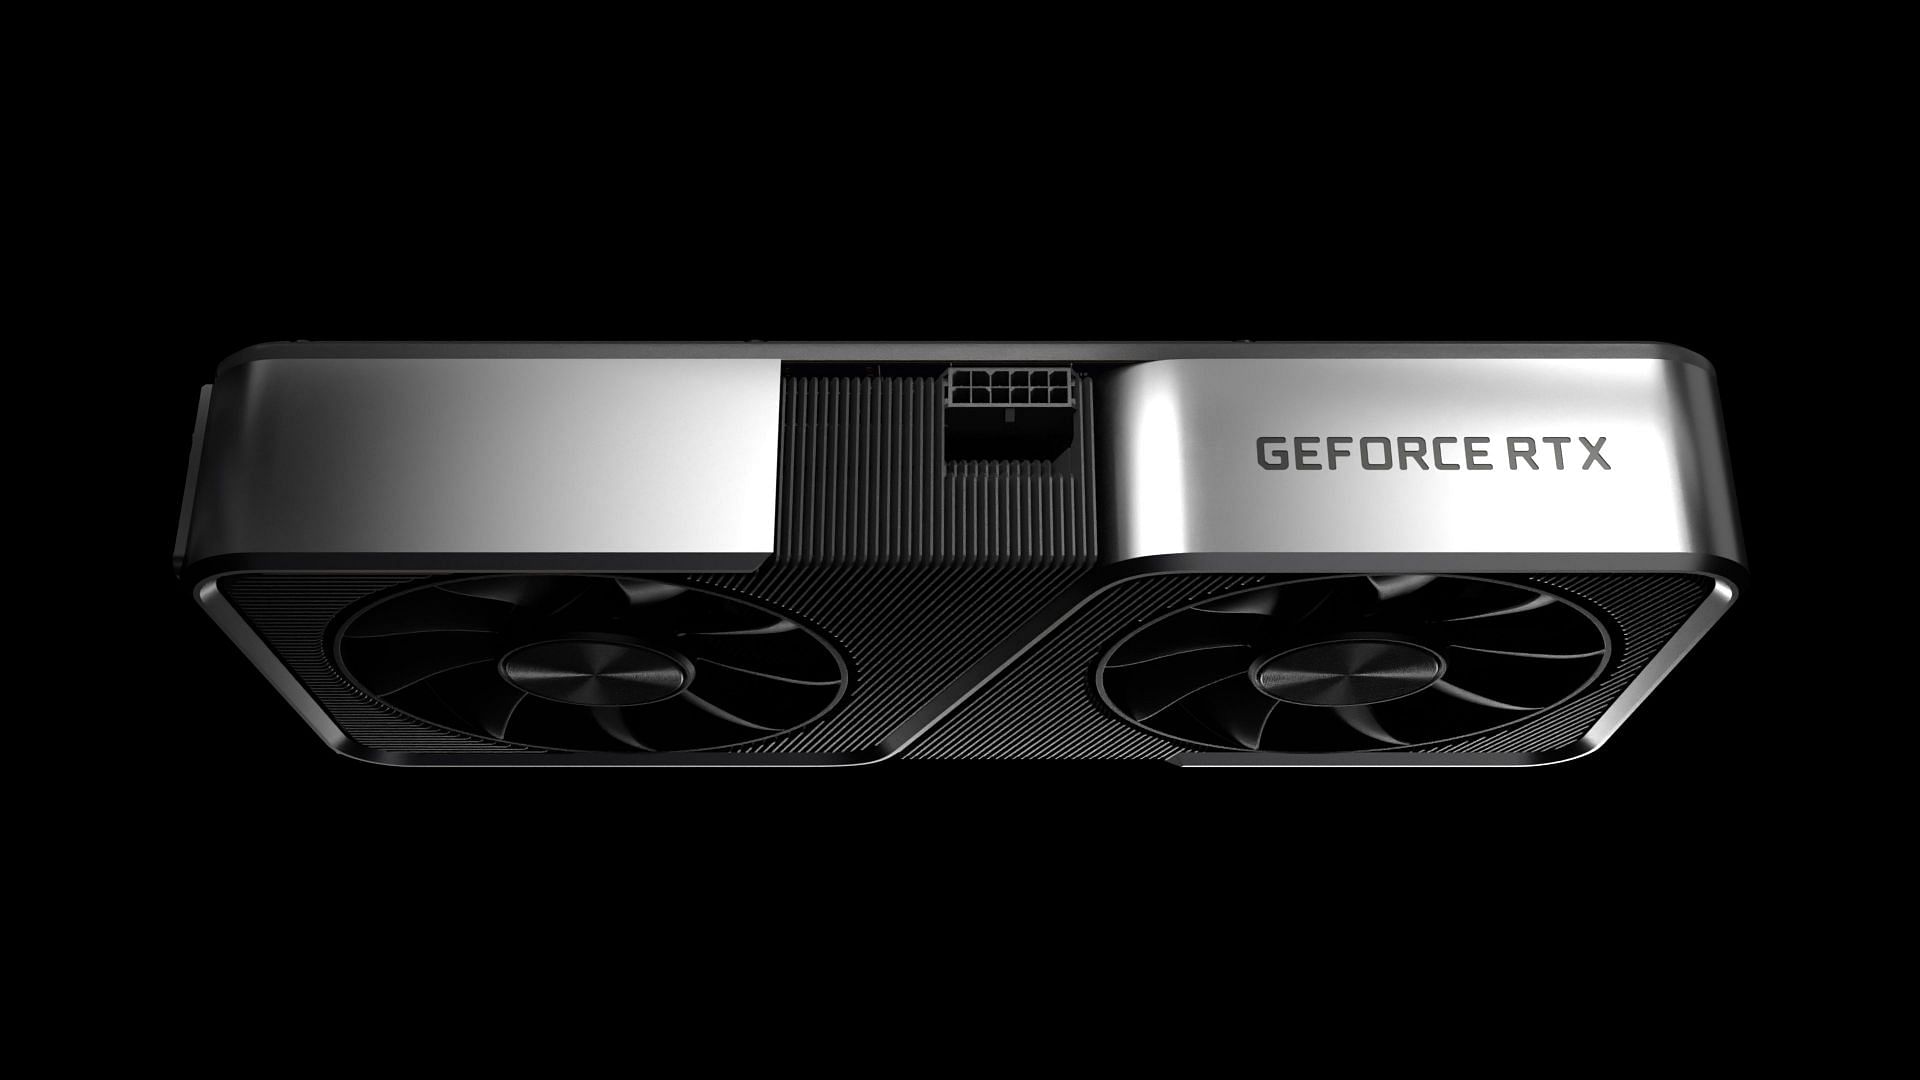 5 best graphics cards for gaming and streaming